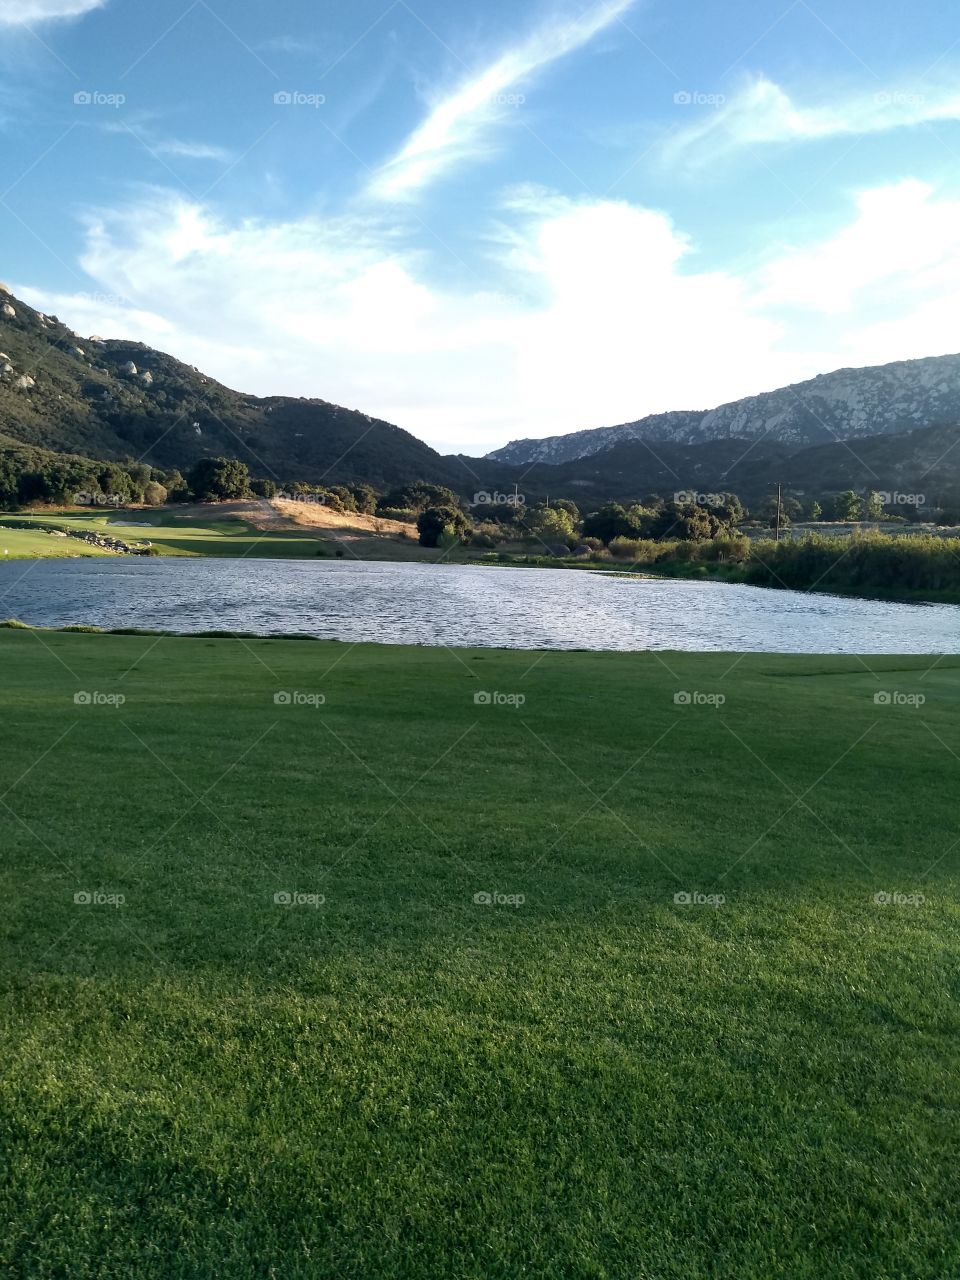 Temecula Golf Course of looking the pawn and the hills in the valley.😀